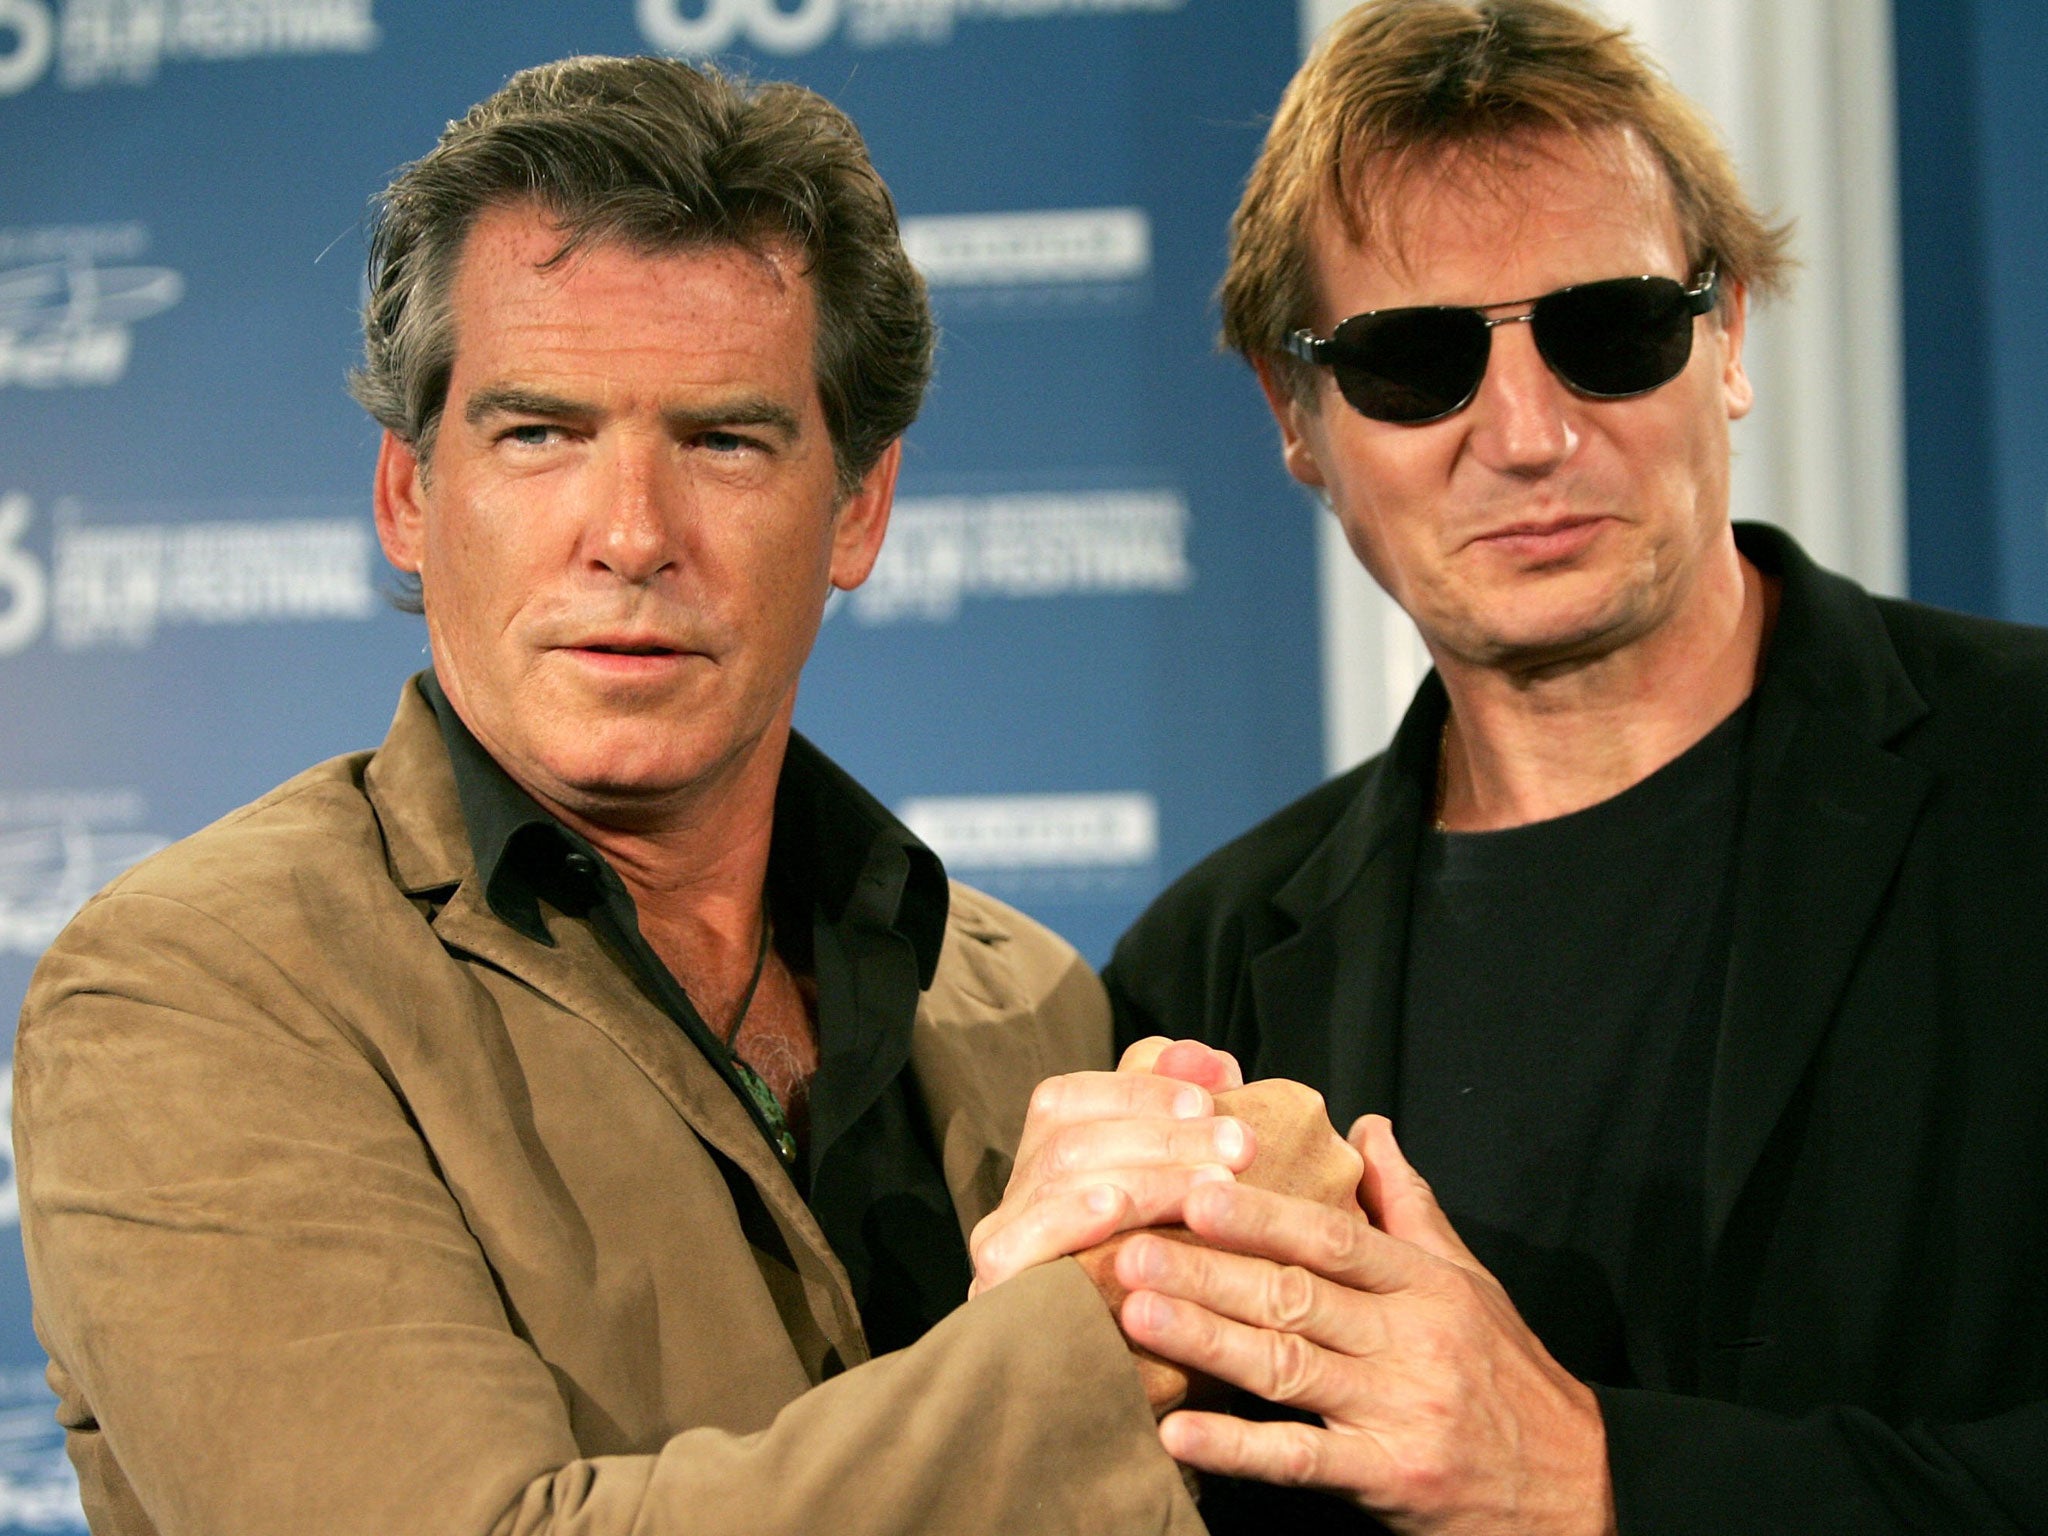 Pierce Brosnan and Liam Neeson are teaming up to make Northern Irish movie 'A Christmas Star' in October 2014